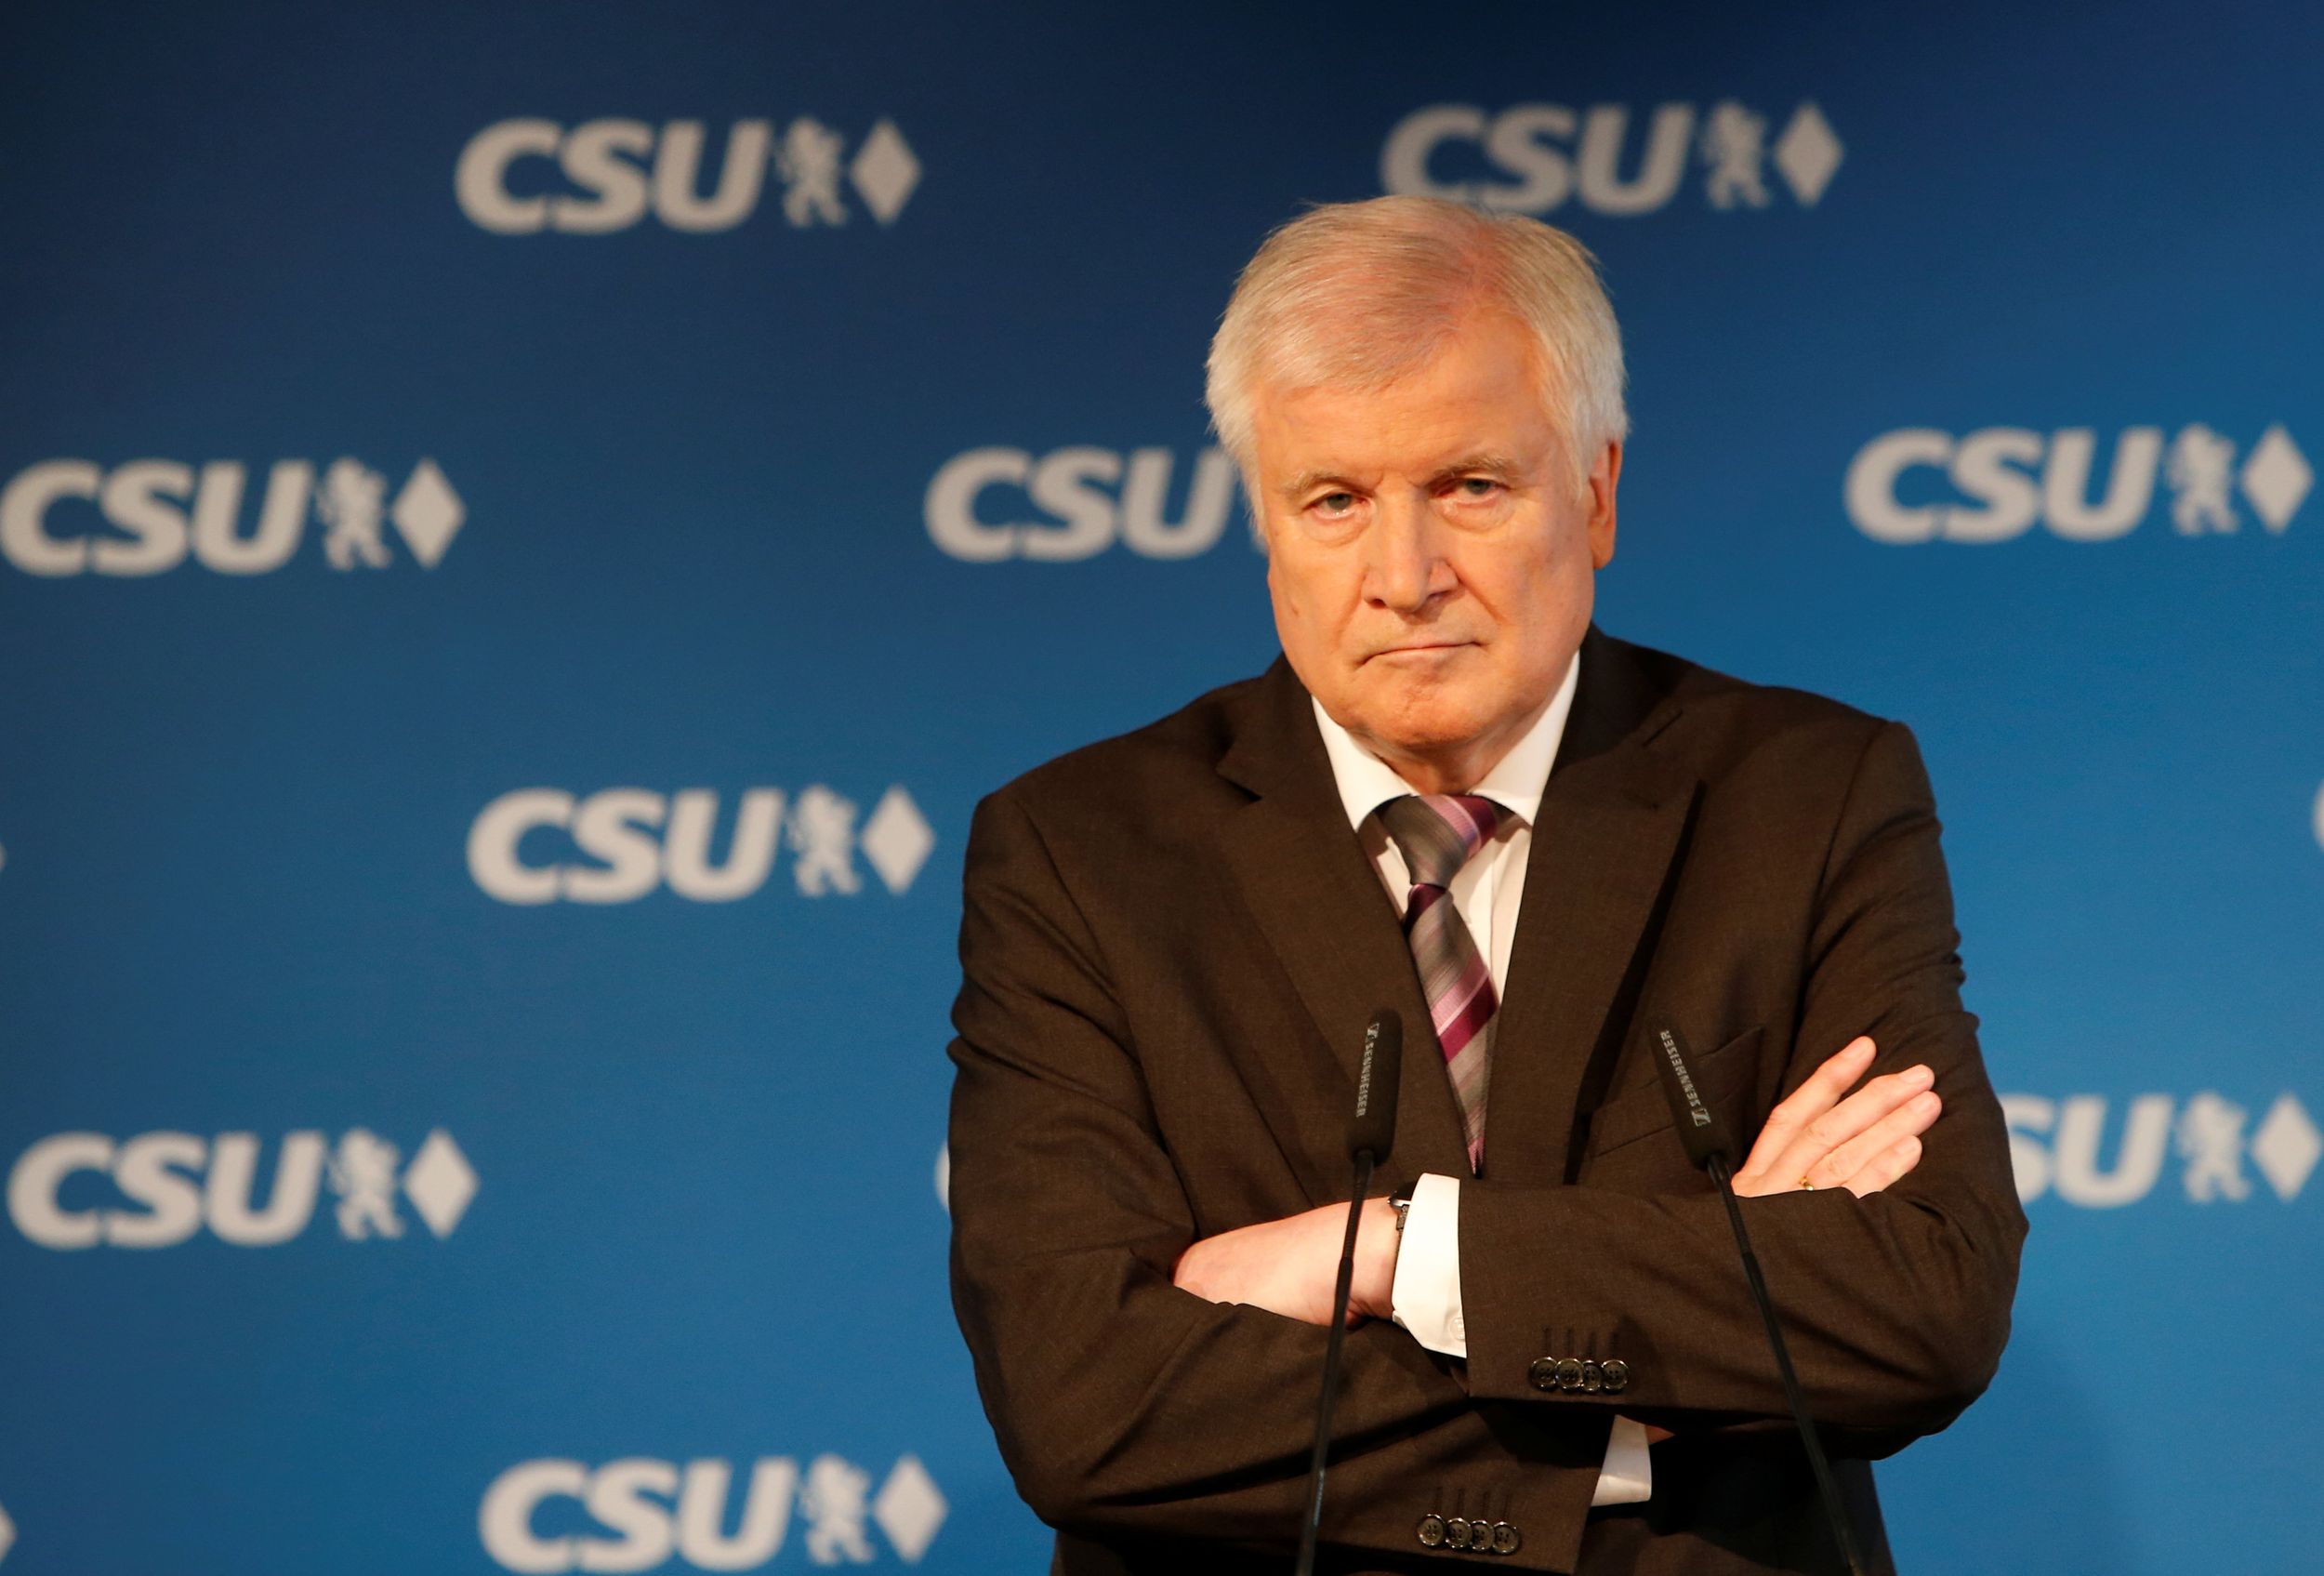 THE CENTER FADES FURTHER: BAVARIA’S ELECTIONS